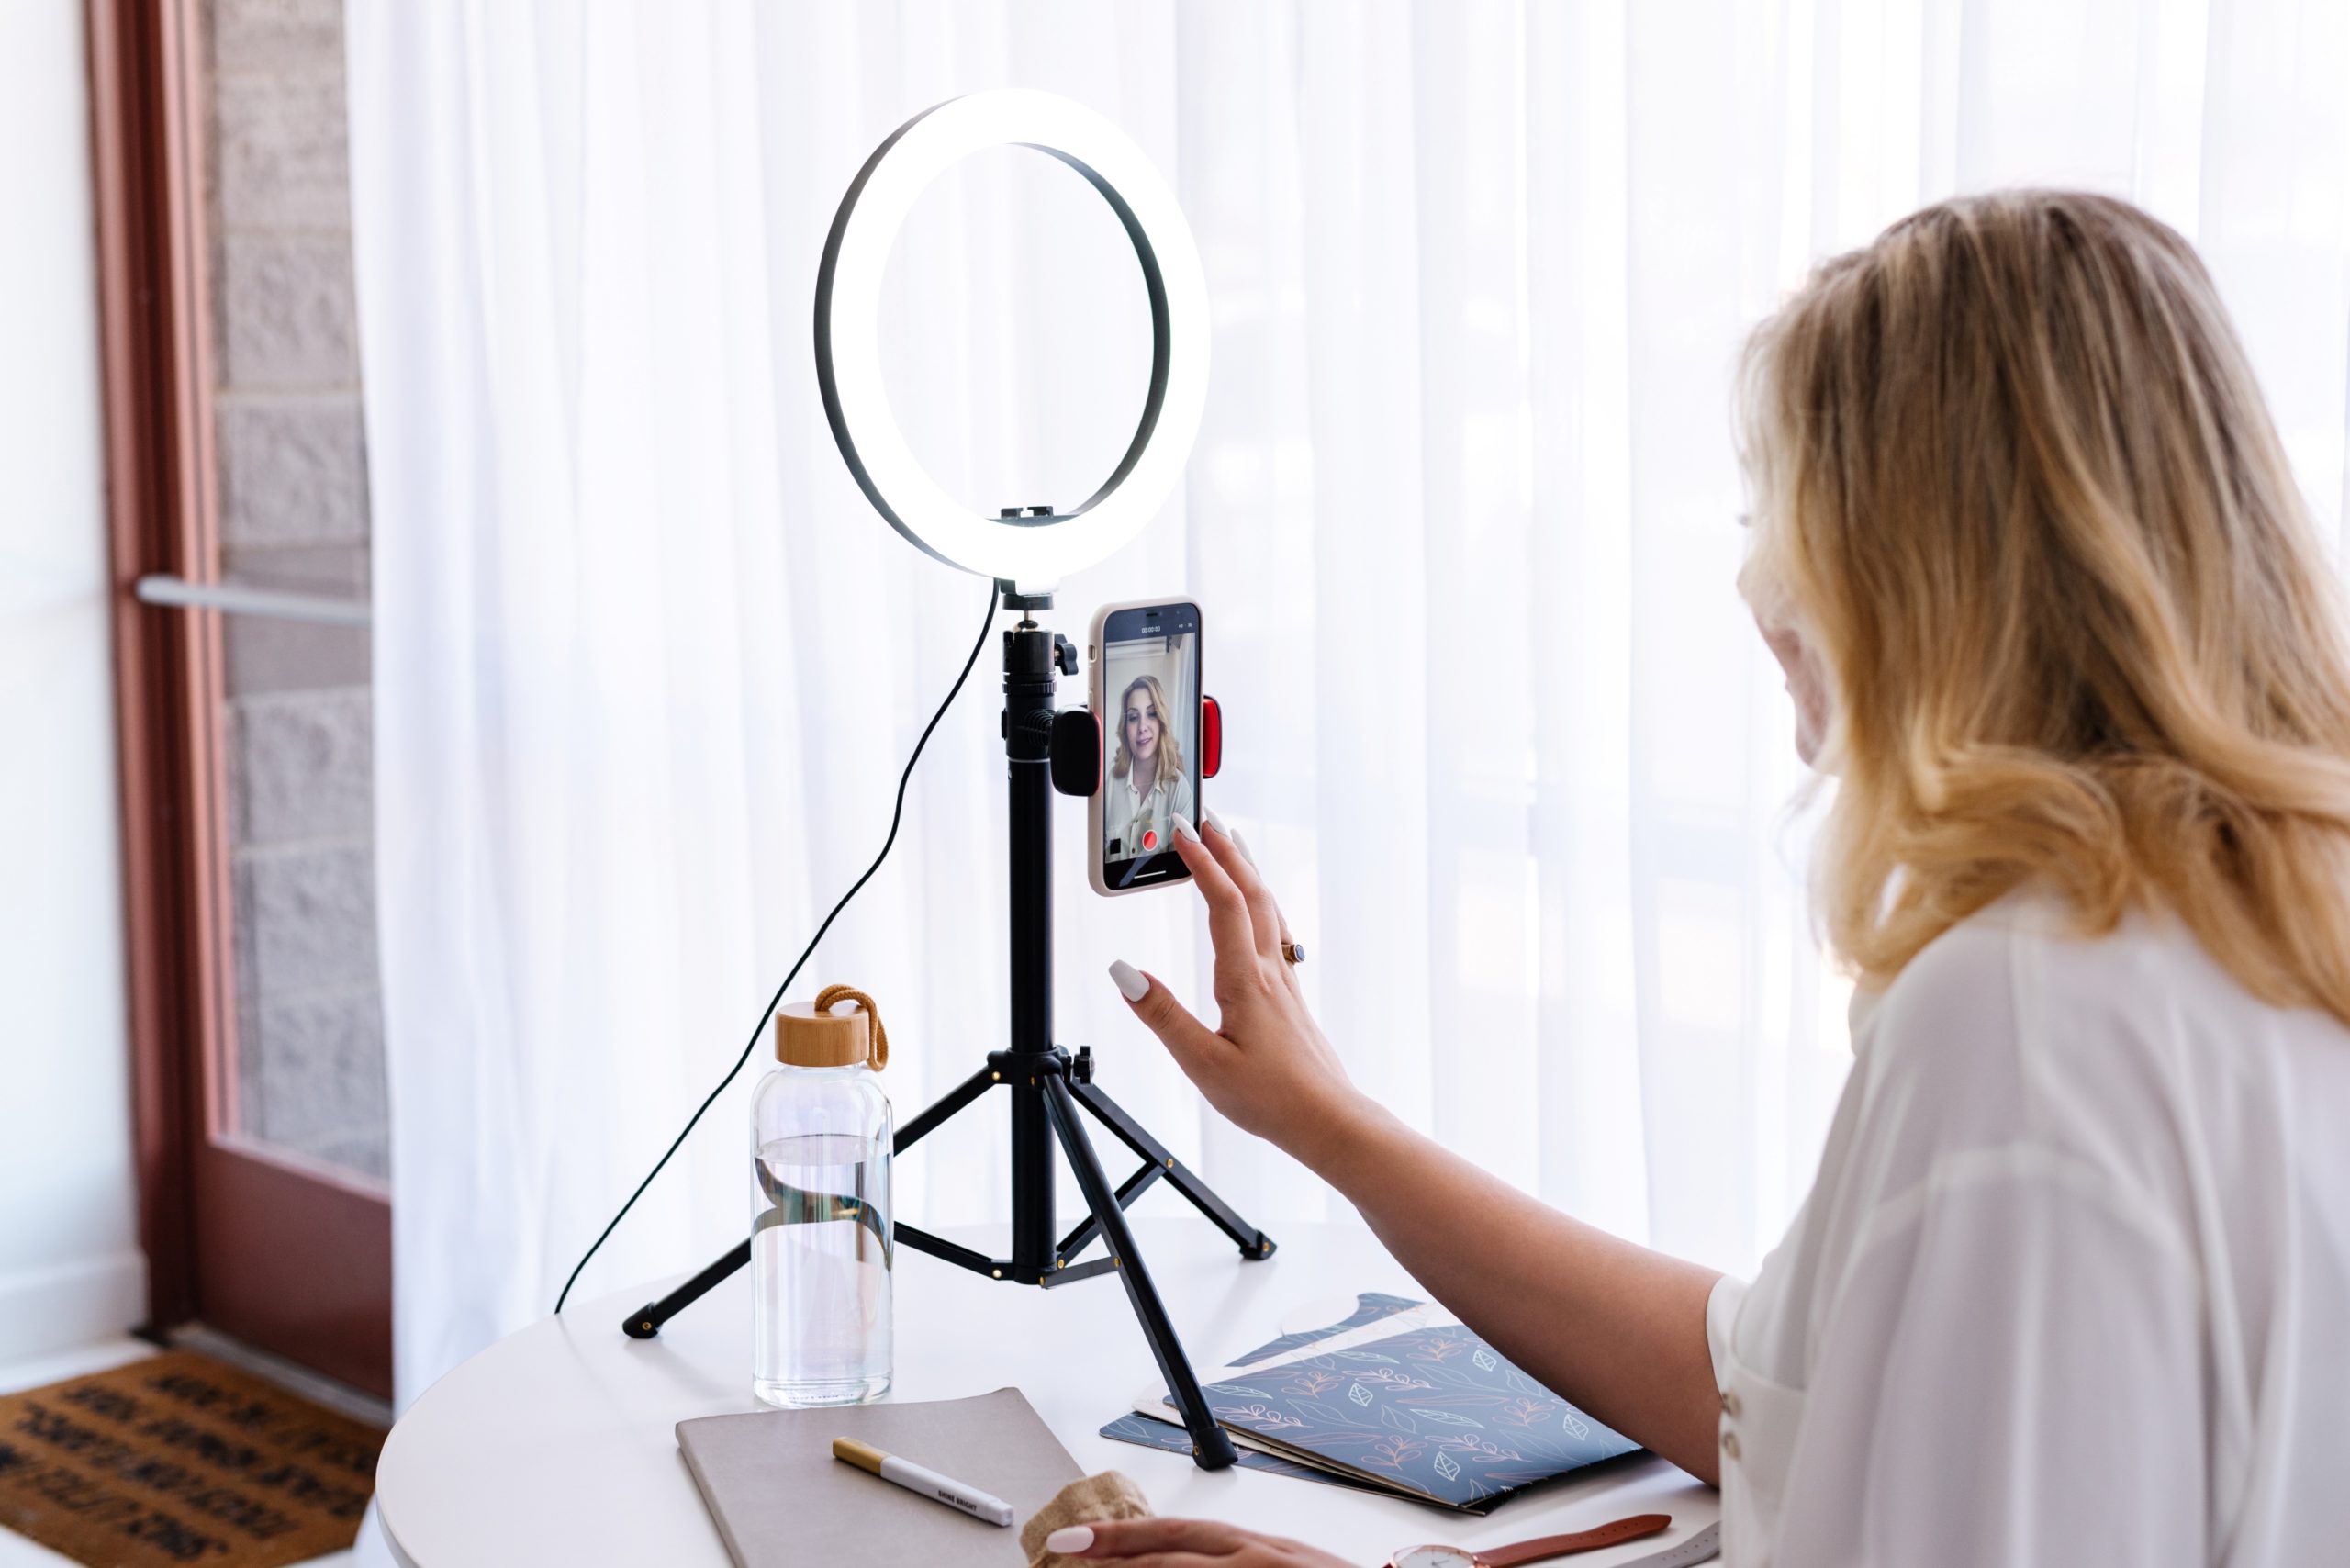 blonde lady wearing a white shirt and talking to a phone mounted on a ring light stand on a table